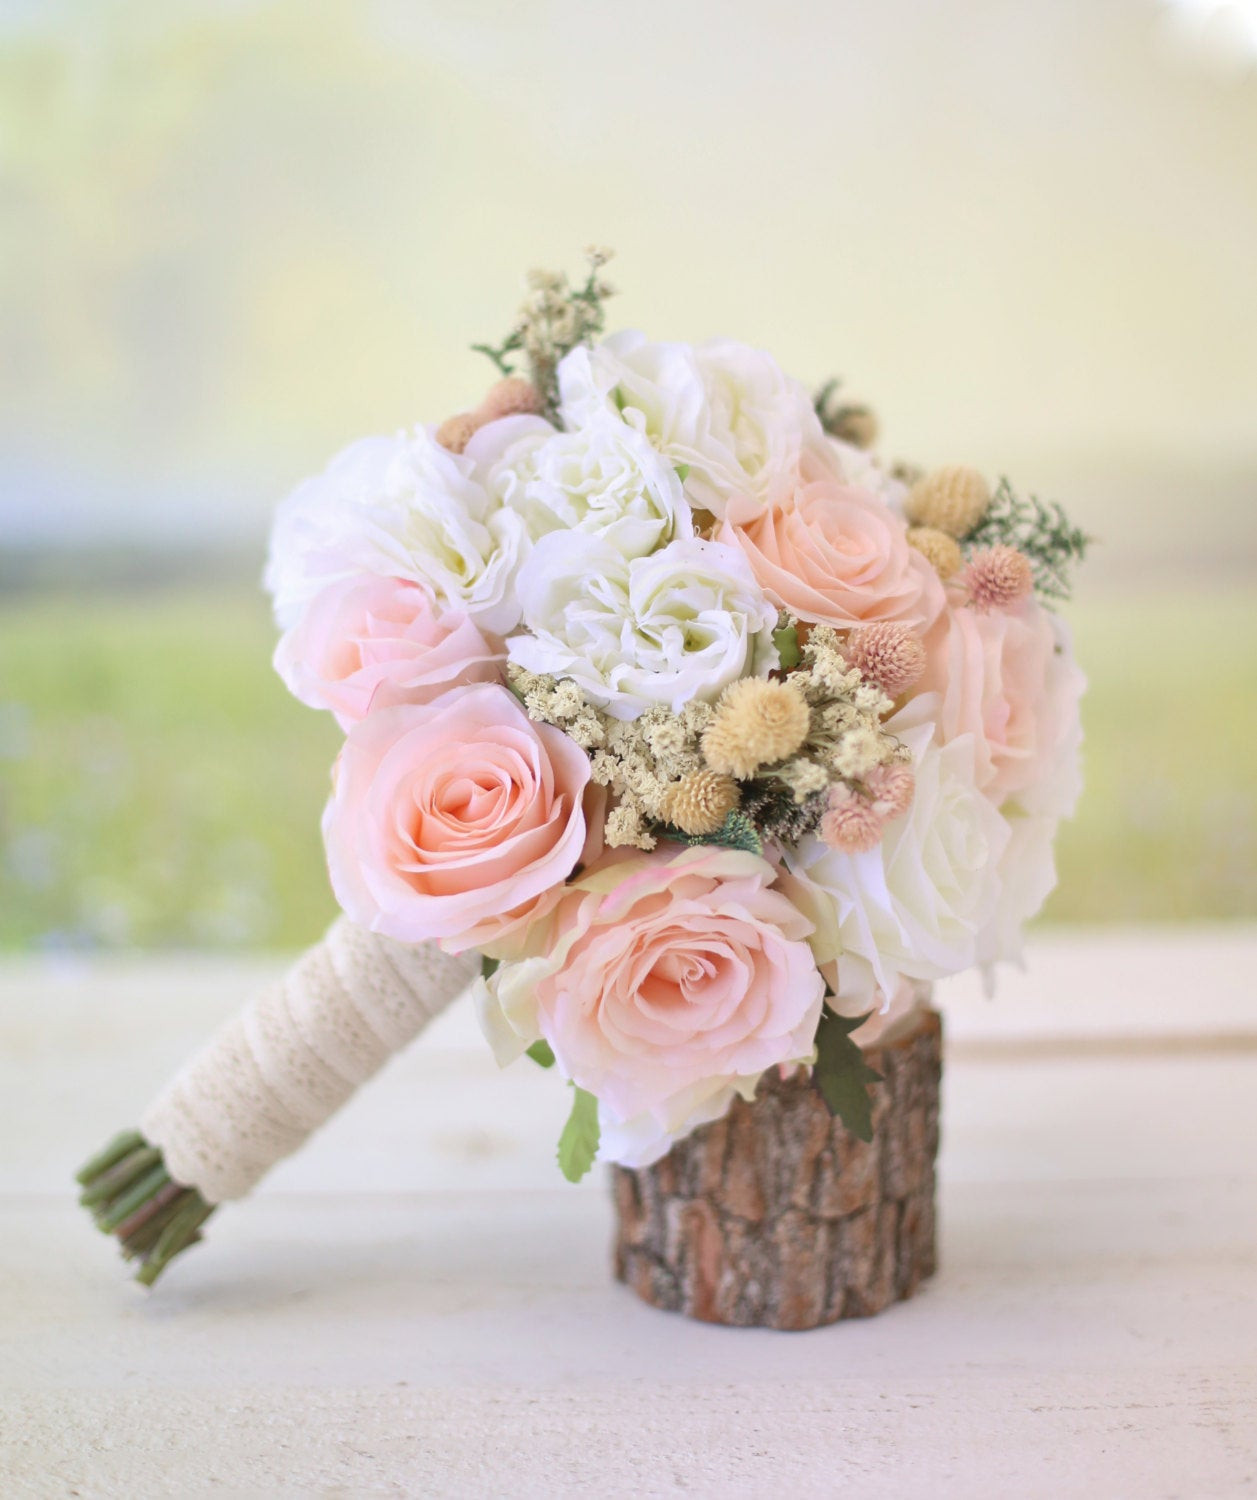 Silk Flower Wedding Bouquets
 Silk Bridal Bouquet Wildflowers Pink Roses Baby s by